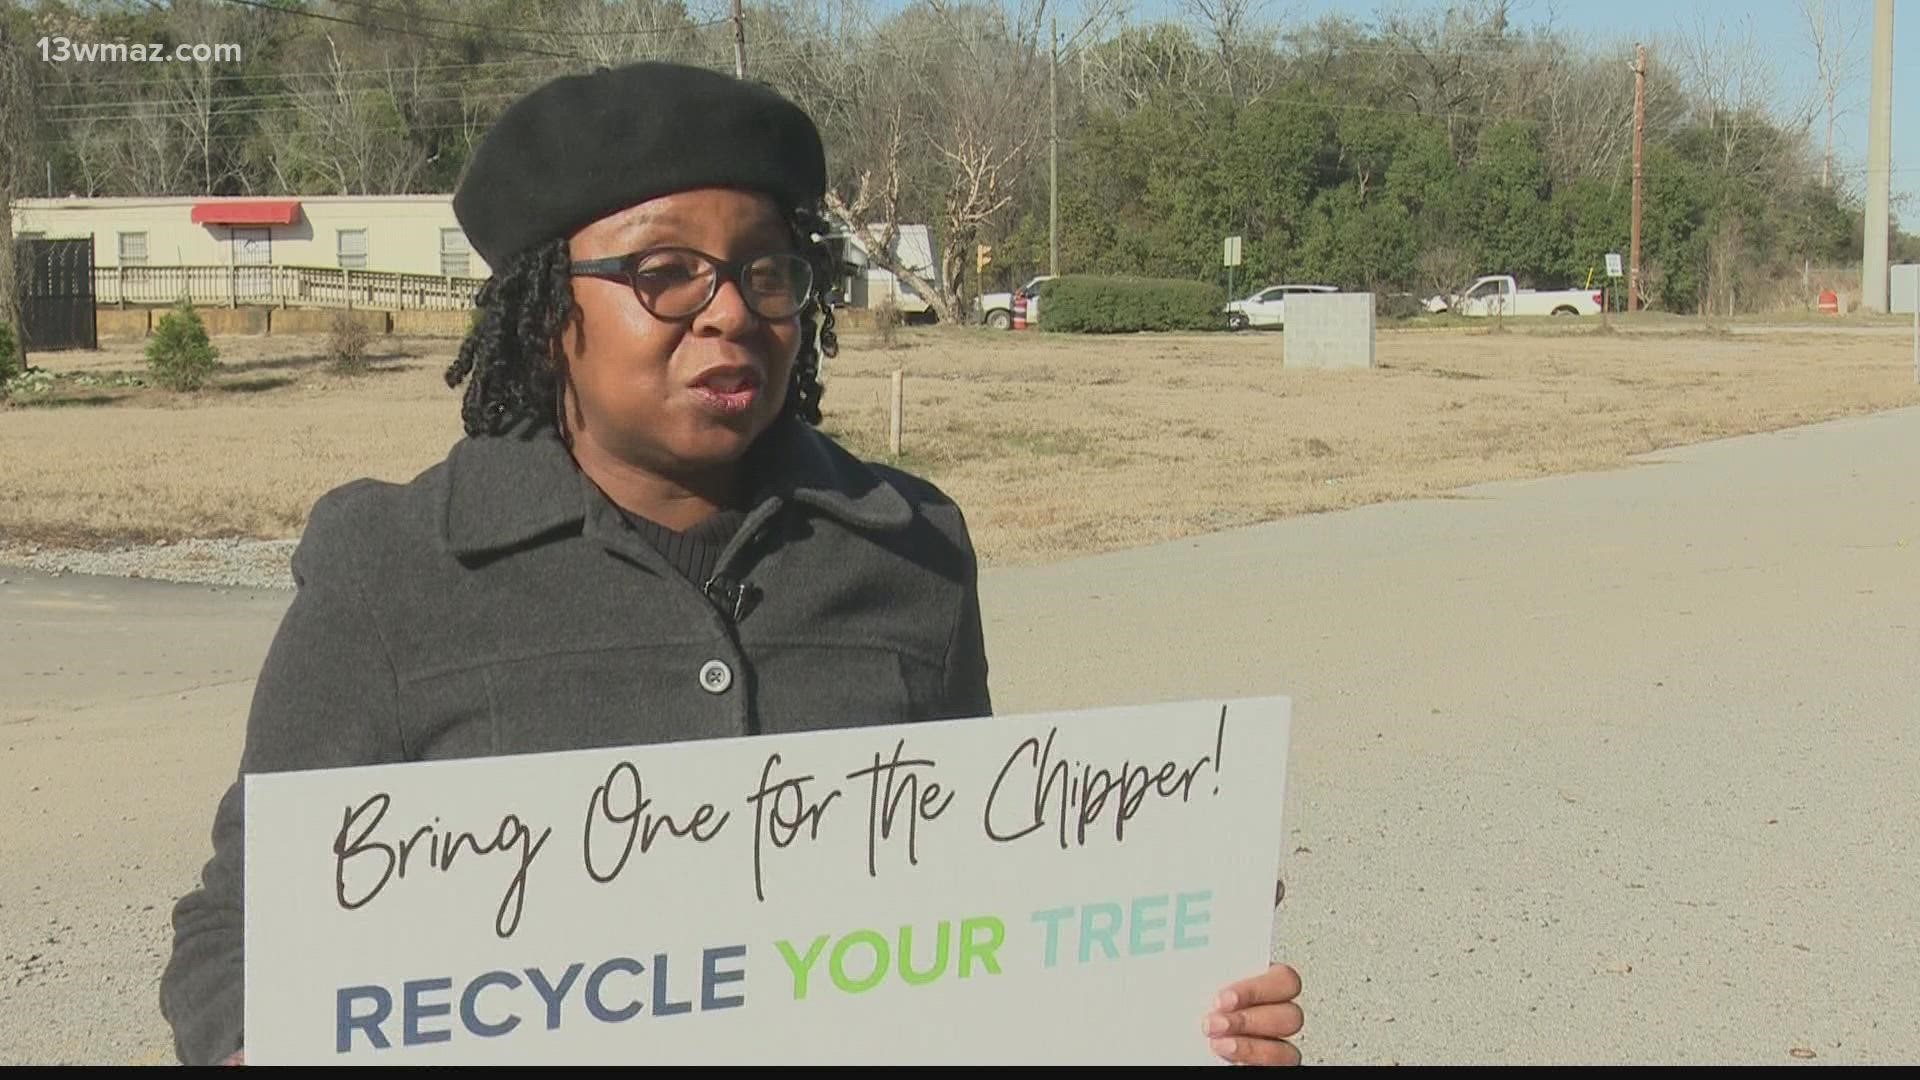 This annual project helps recycle real Christmas trees in an eco-friendly way.